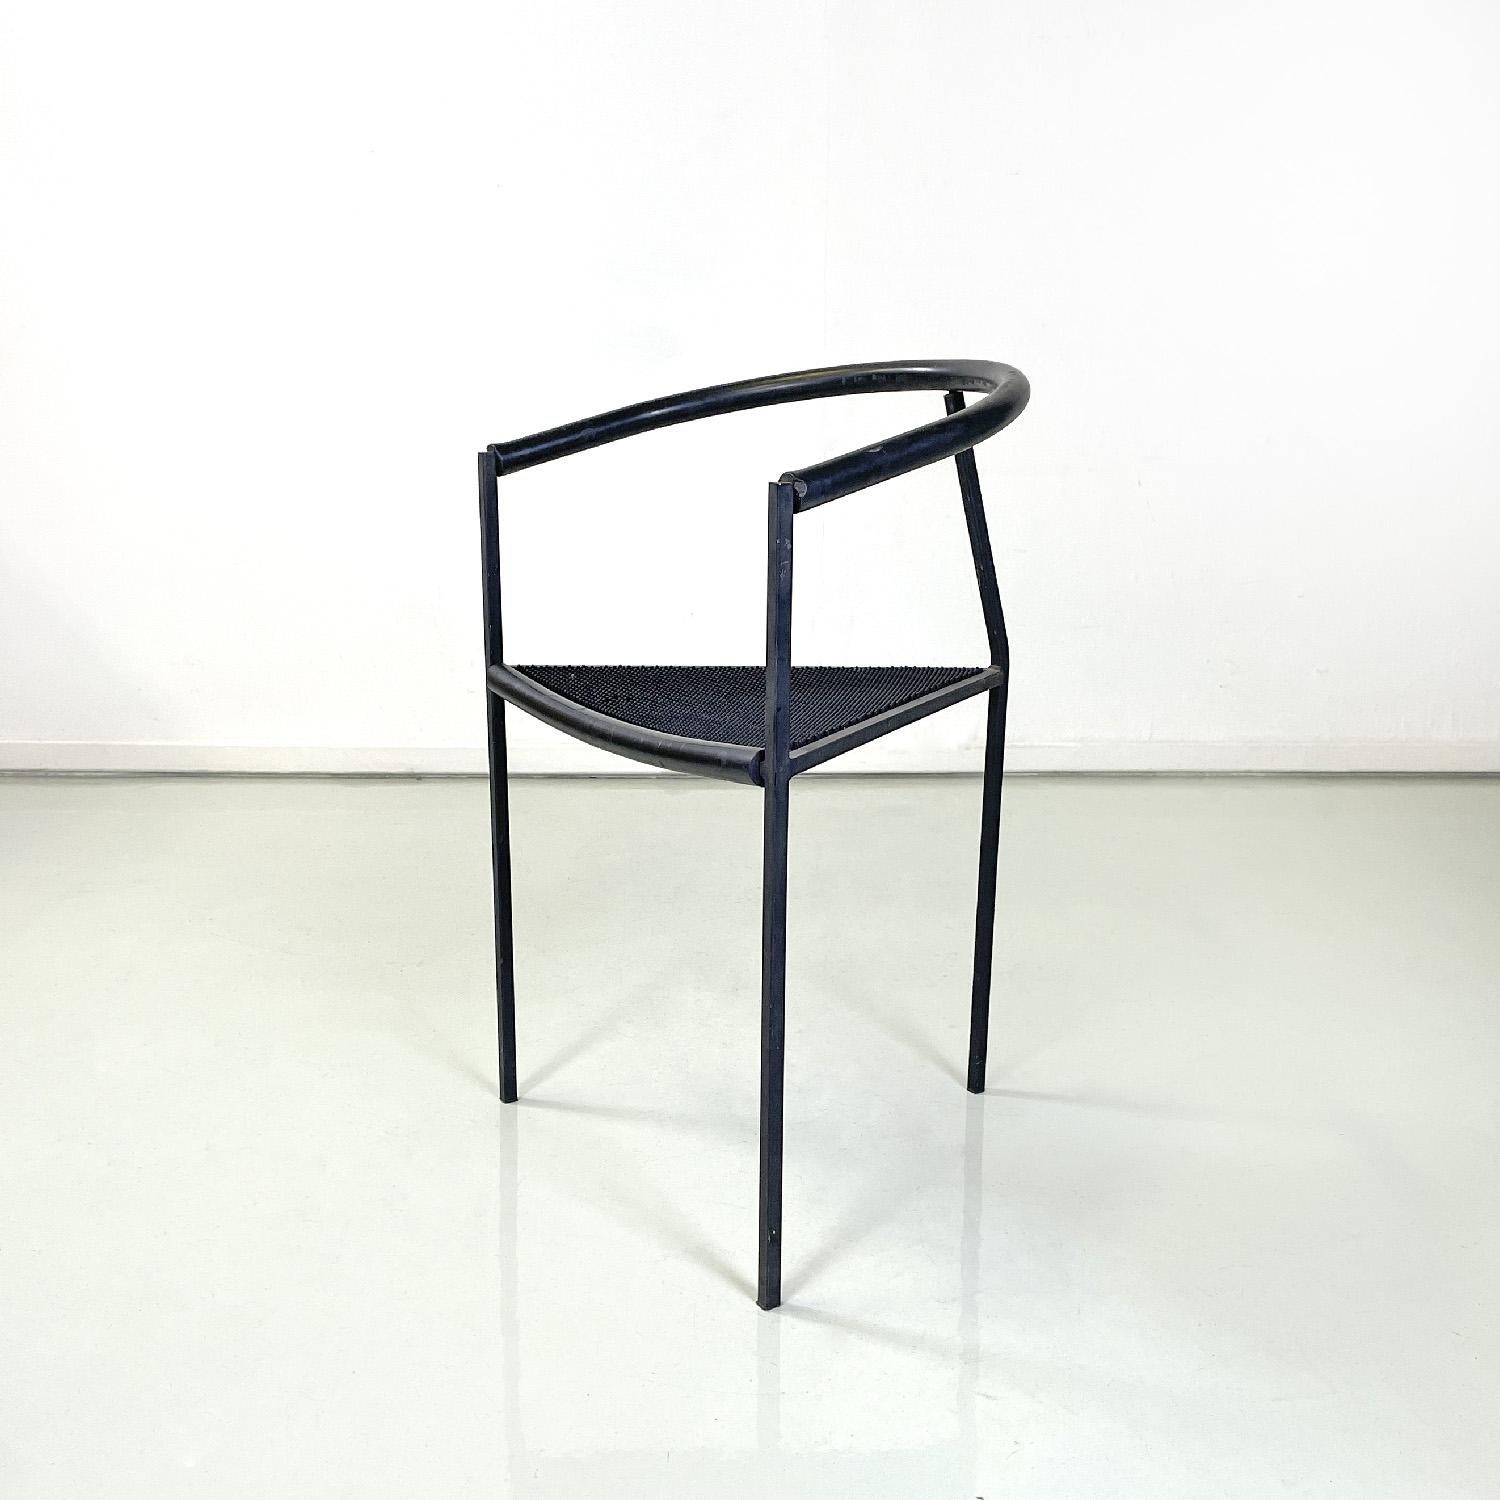 Italian modern black metal chair by Peregalli and Calatroni for Zeus, 1990s
Chair with triangular seat in textured black rubber. The structure has a square section in matt black painted steel. The chair has a backrest and armrests covered in black